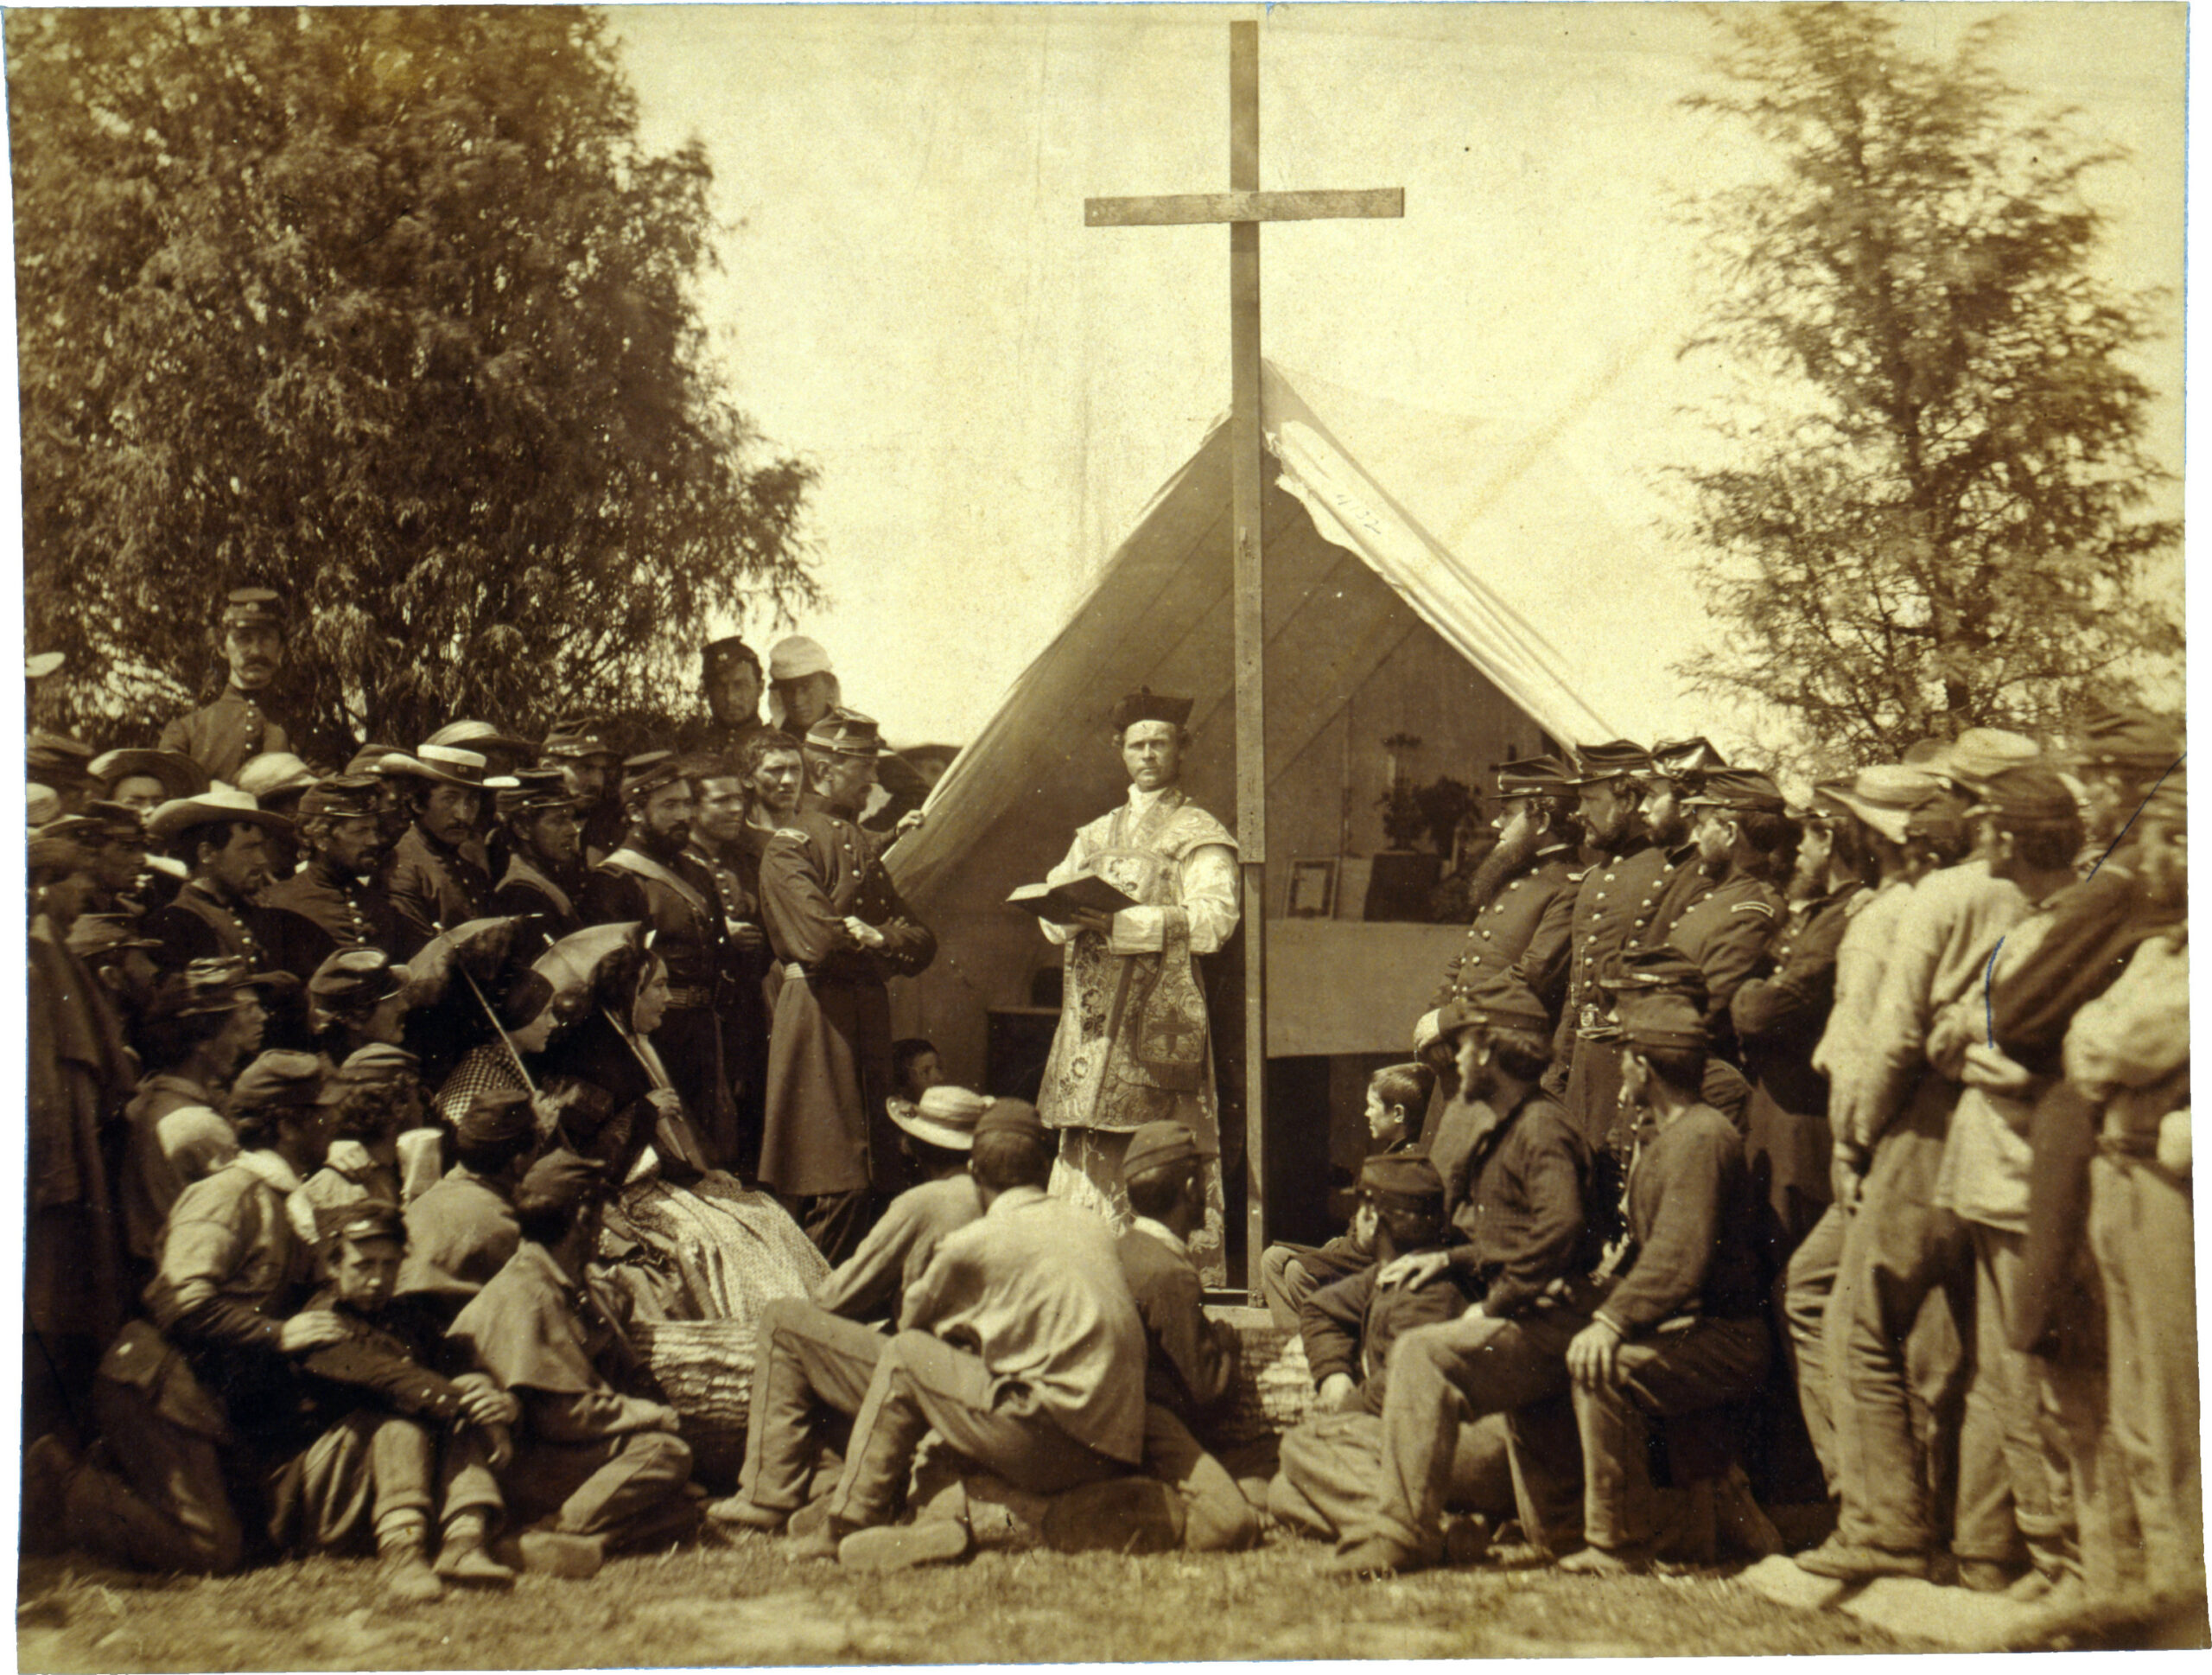 Photograph shows Father Thomas H. Mooney, Chaplain of the 69th Infantry Regiment of the New York State Militia and Irish American soldiers at a Catholic Mass at Fort Cocoran, Arlington Heights, Virginia on June 1, 1861. (Source: The Irish American, June 22, 1861)